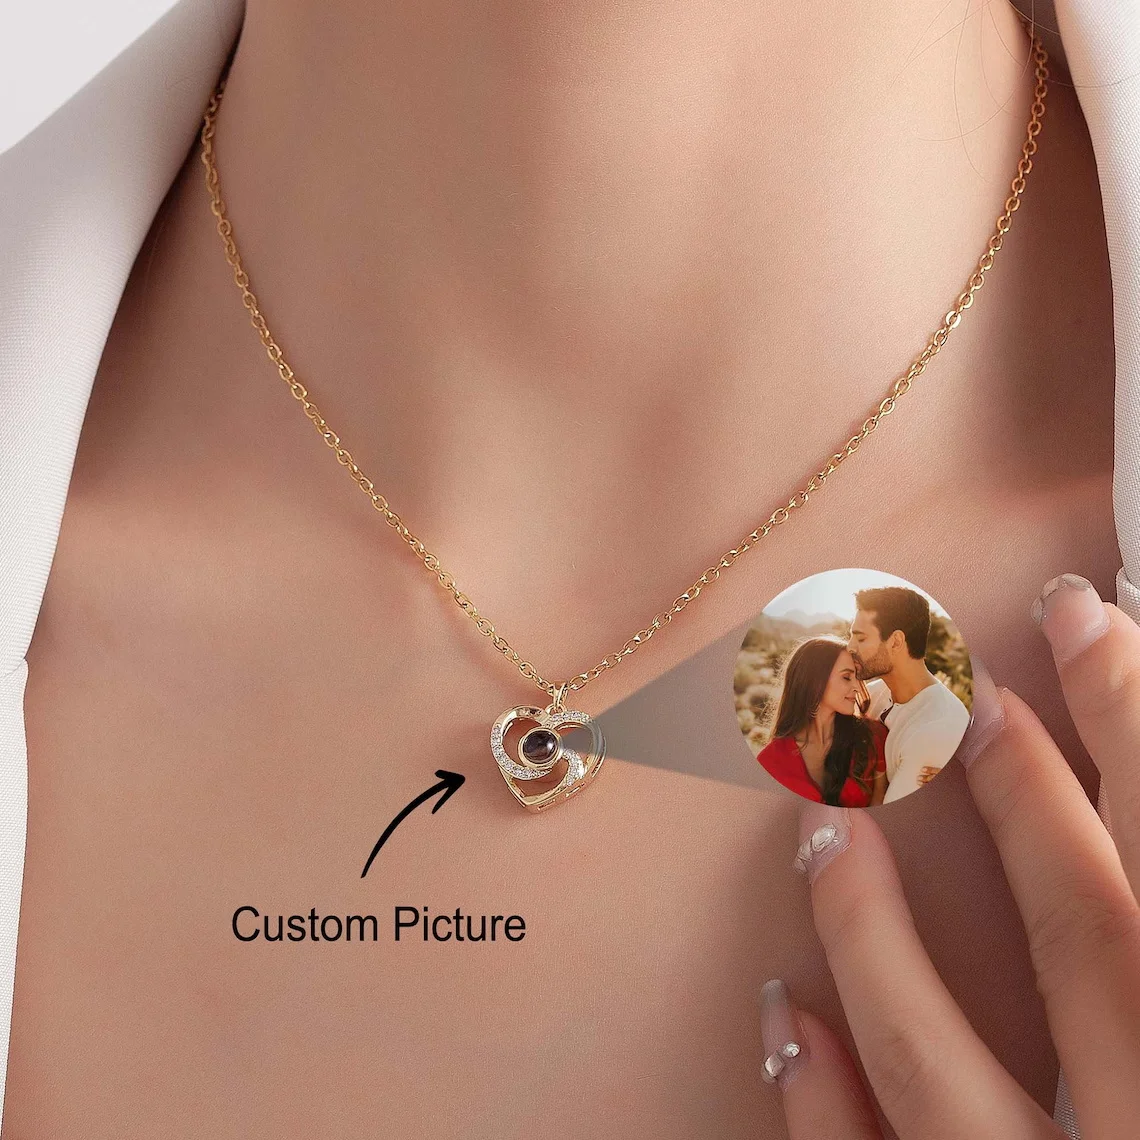 Custom Projection Picture Heart Necklaces Personalized Custom Photo Pendant Necklace Valentines Day Family Memorial Jewelry Gift